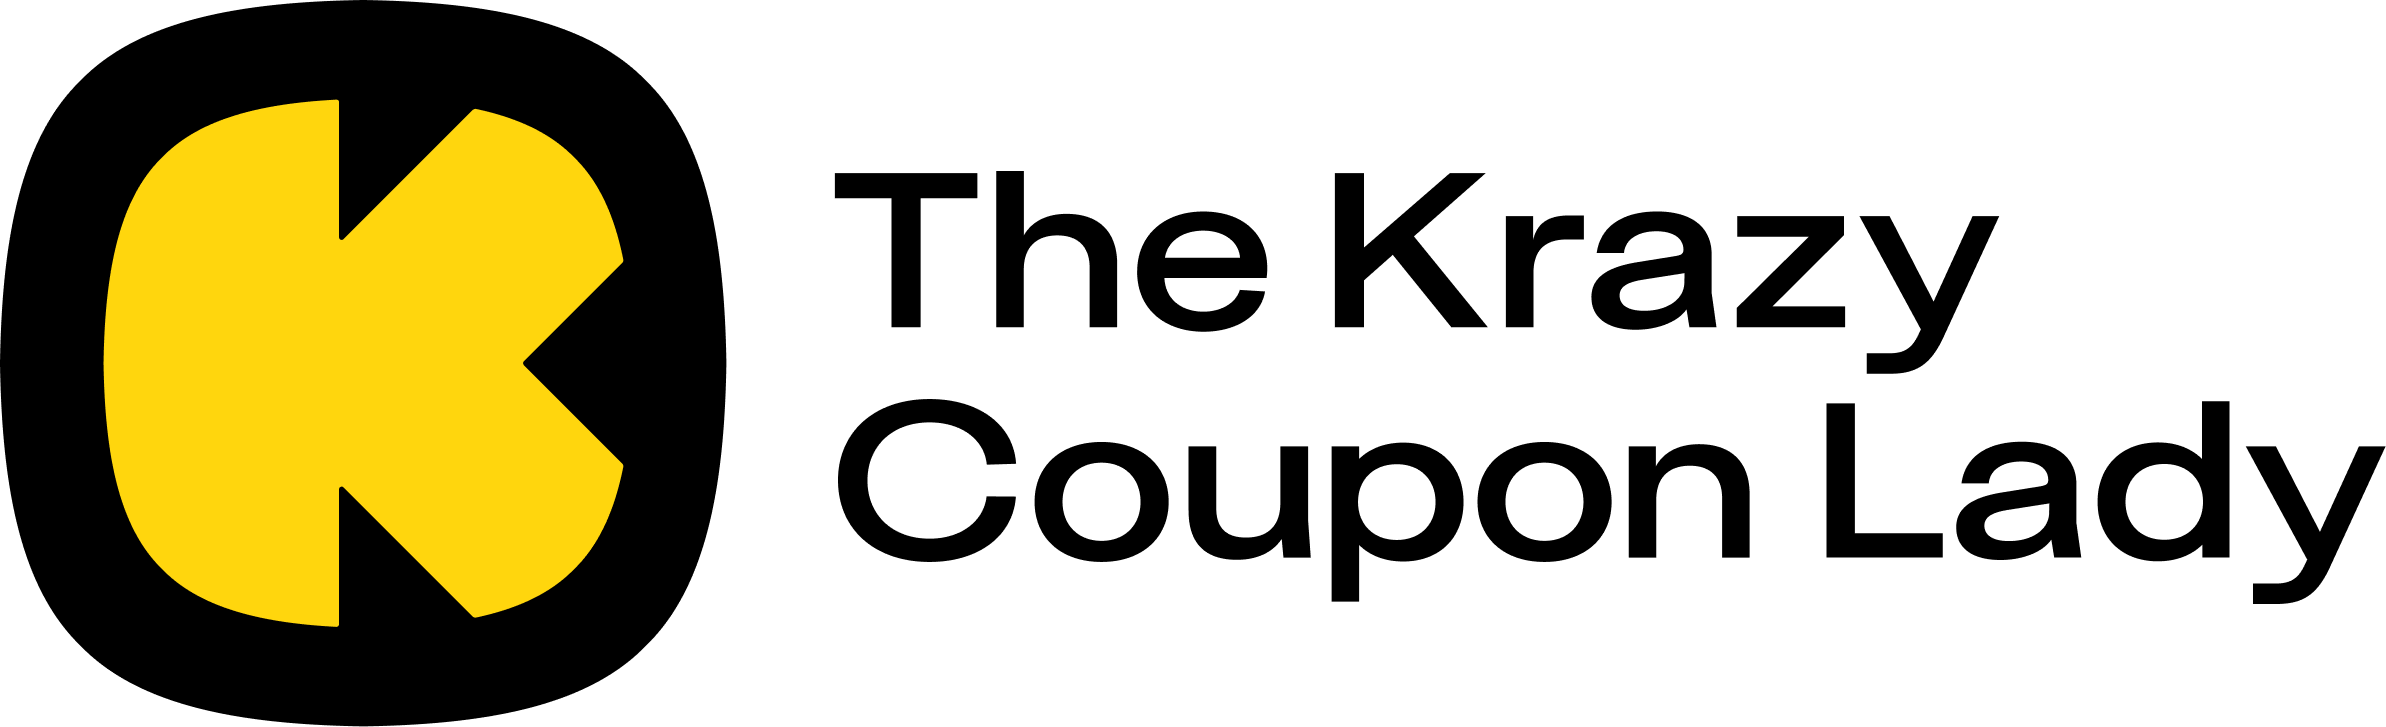 The Krazy Coupon Lady | Best Deals, Freebies, and Coupons